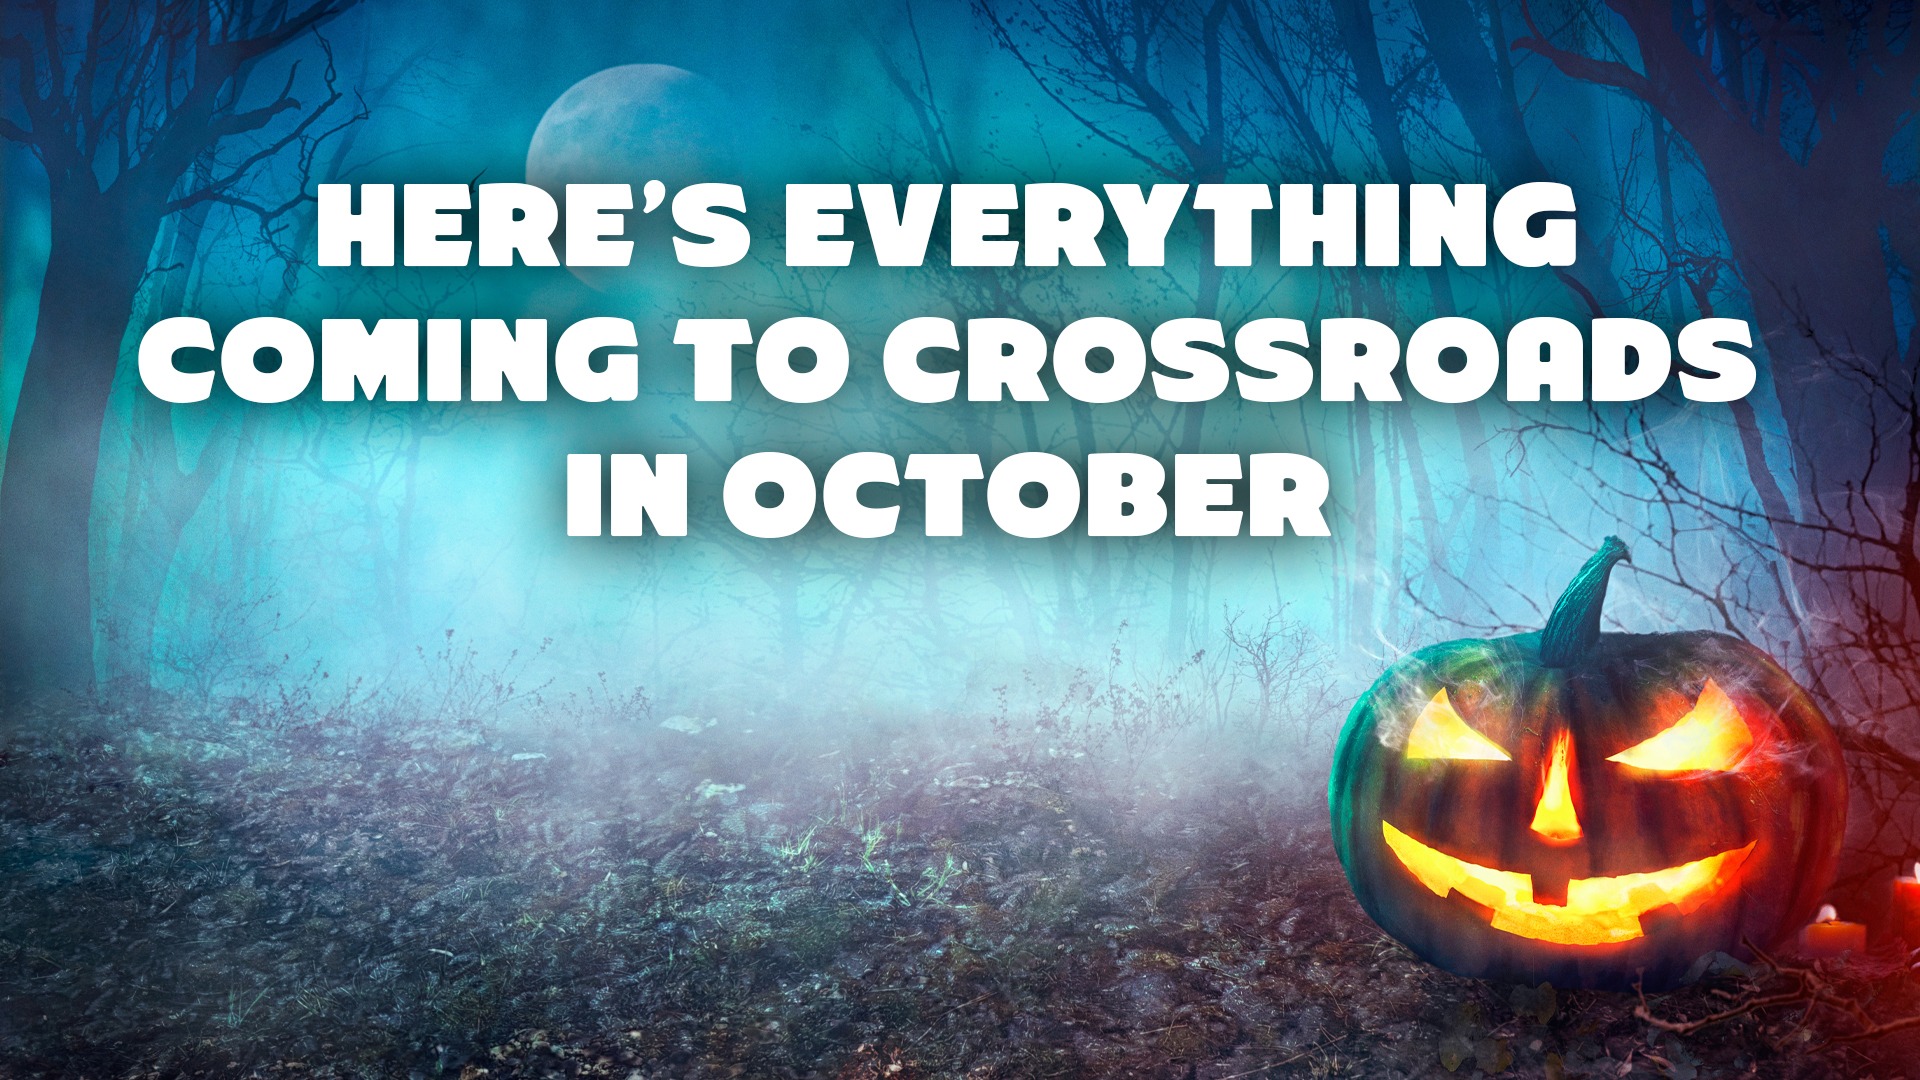 Here’s Everything Coming to Crossroads in October!